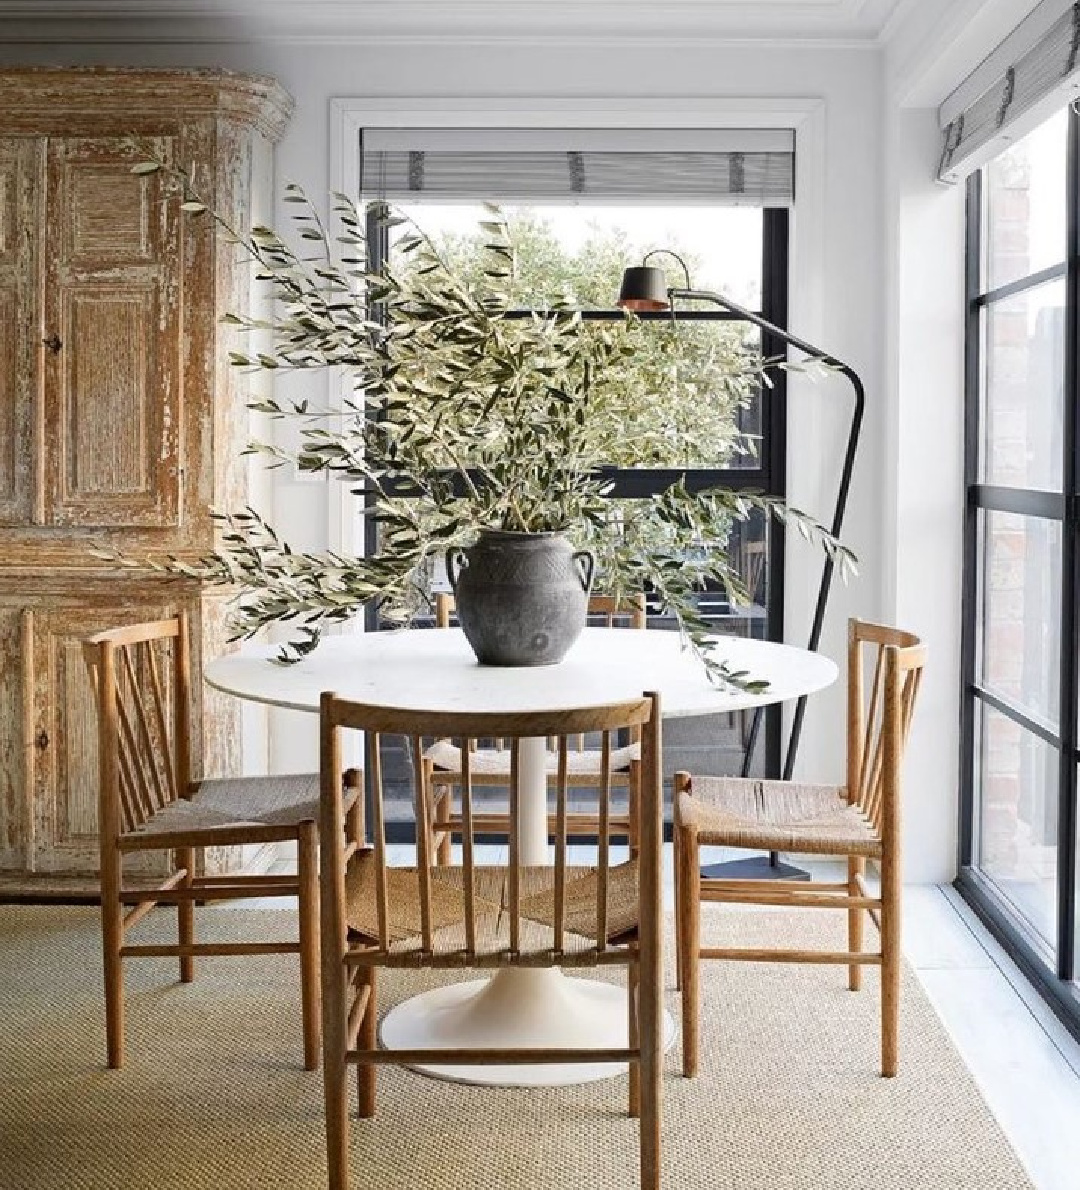 Beautiful, minimal modern English cottage dining room with Saarinen table and wood chairs from Anton & K. #modernenglishcountry #europeancountry